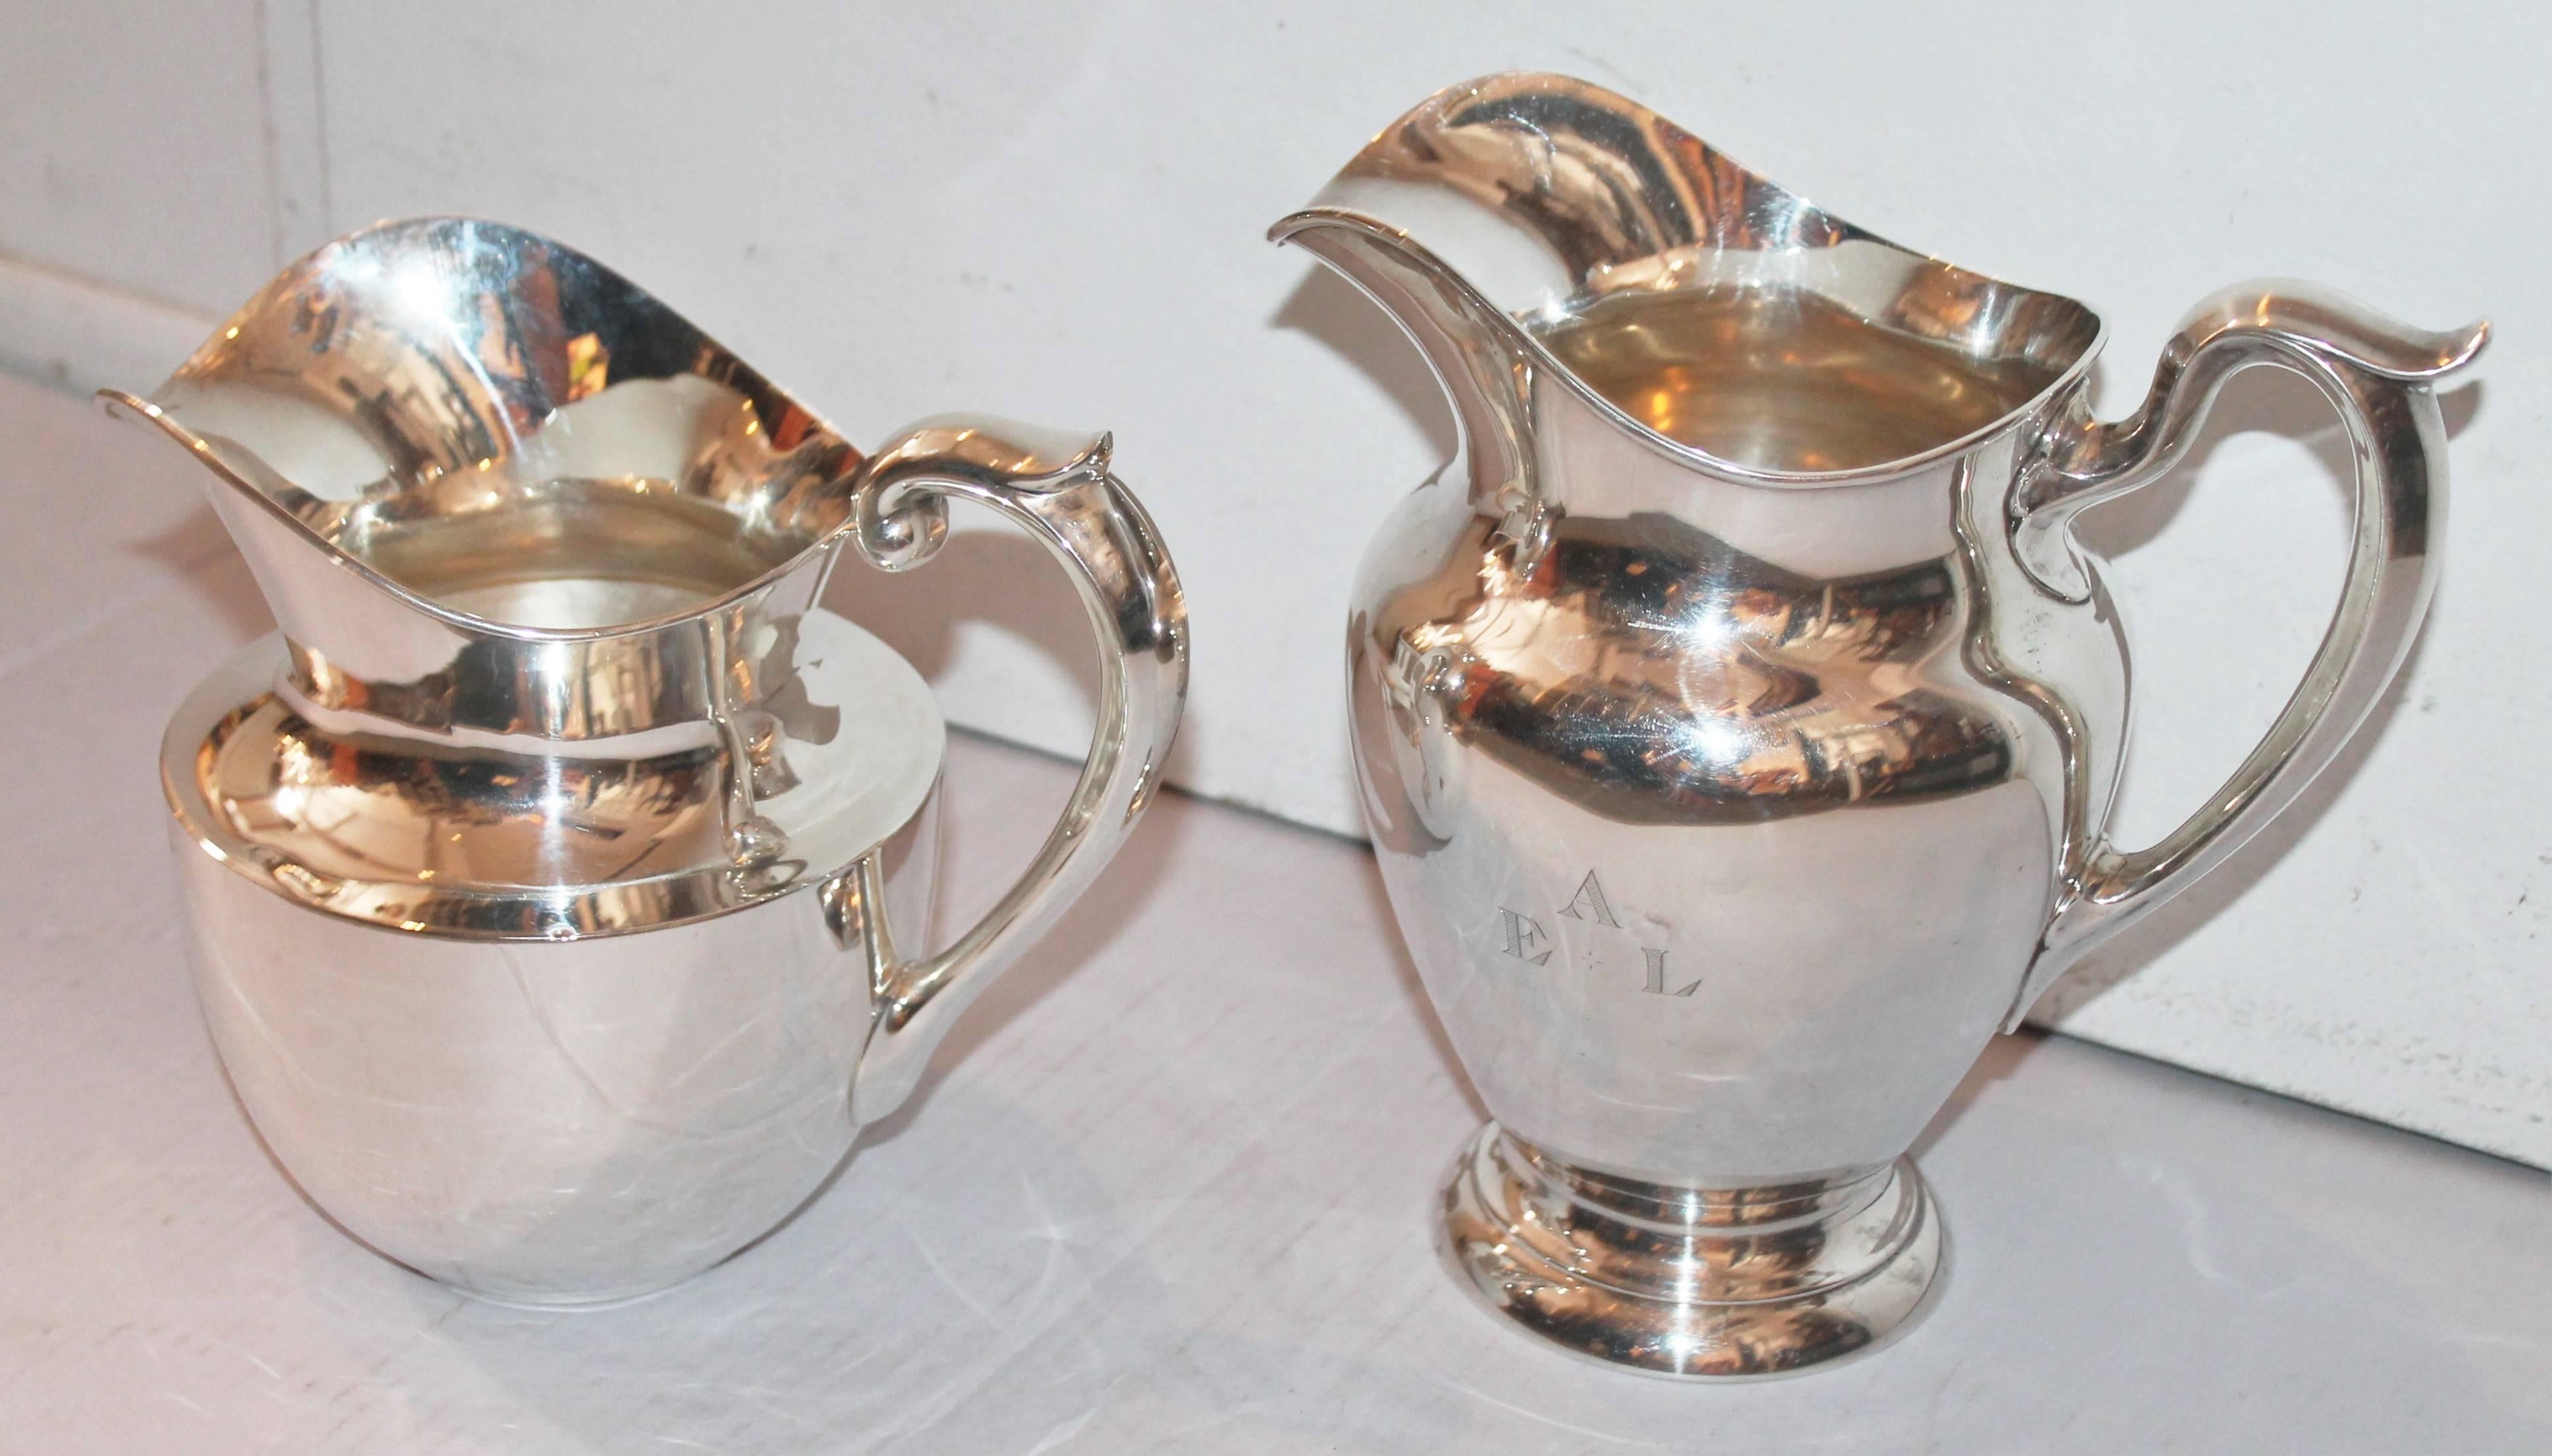 The wide shorter pitcher is marked sterling and is 7.5 inches tall x 8.5 wide and in pristine condition. The second pitcher is very heavy and is signed Gorham Sterling 4 1/4 pint. It is 9" high x 9 1/4 wide. The condition is pristine. Sold as a